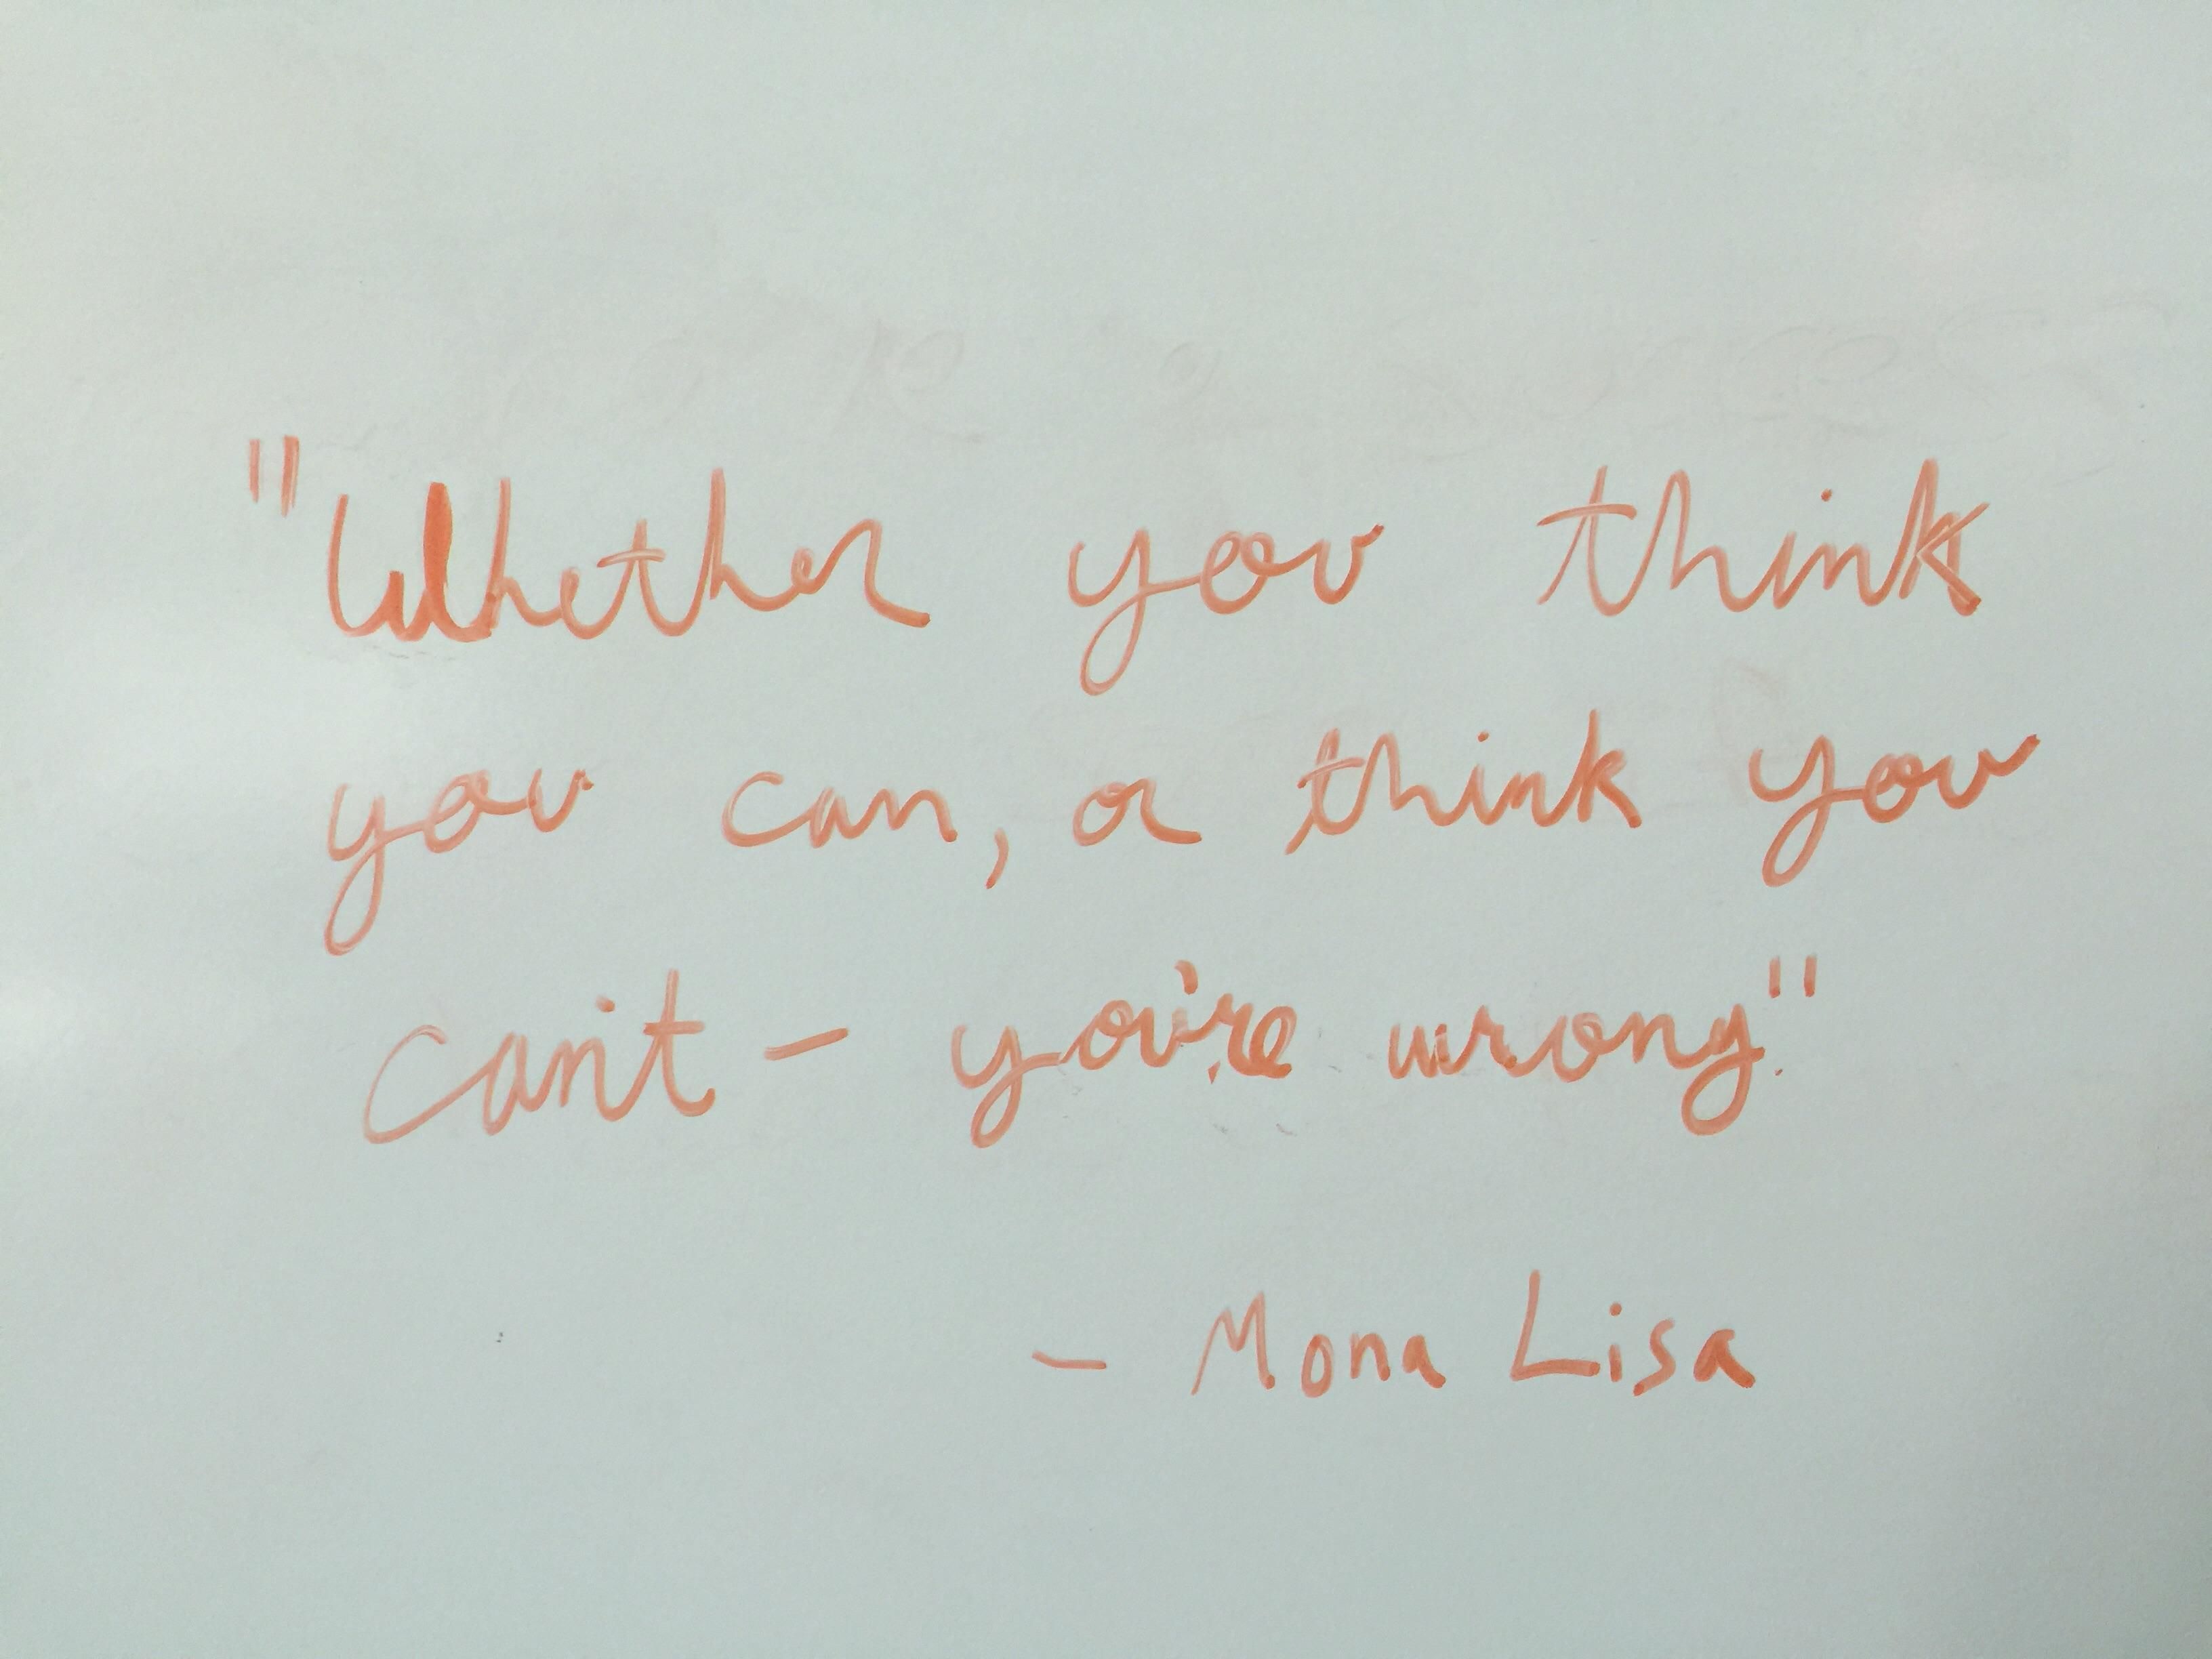 My wife works with a bunch of scientists and every time I visit her work I write a fake quote in the conference room.